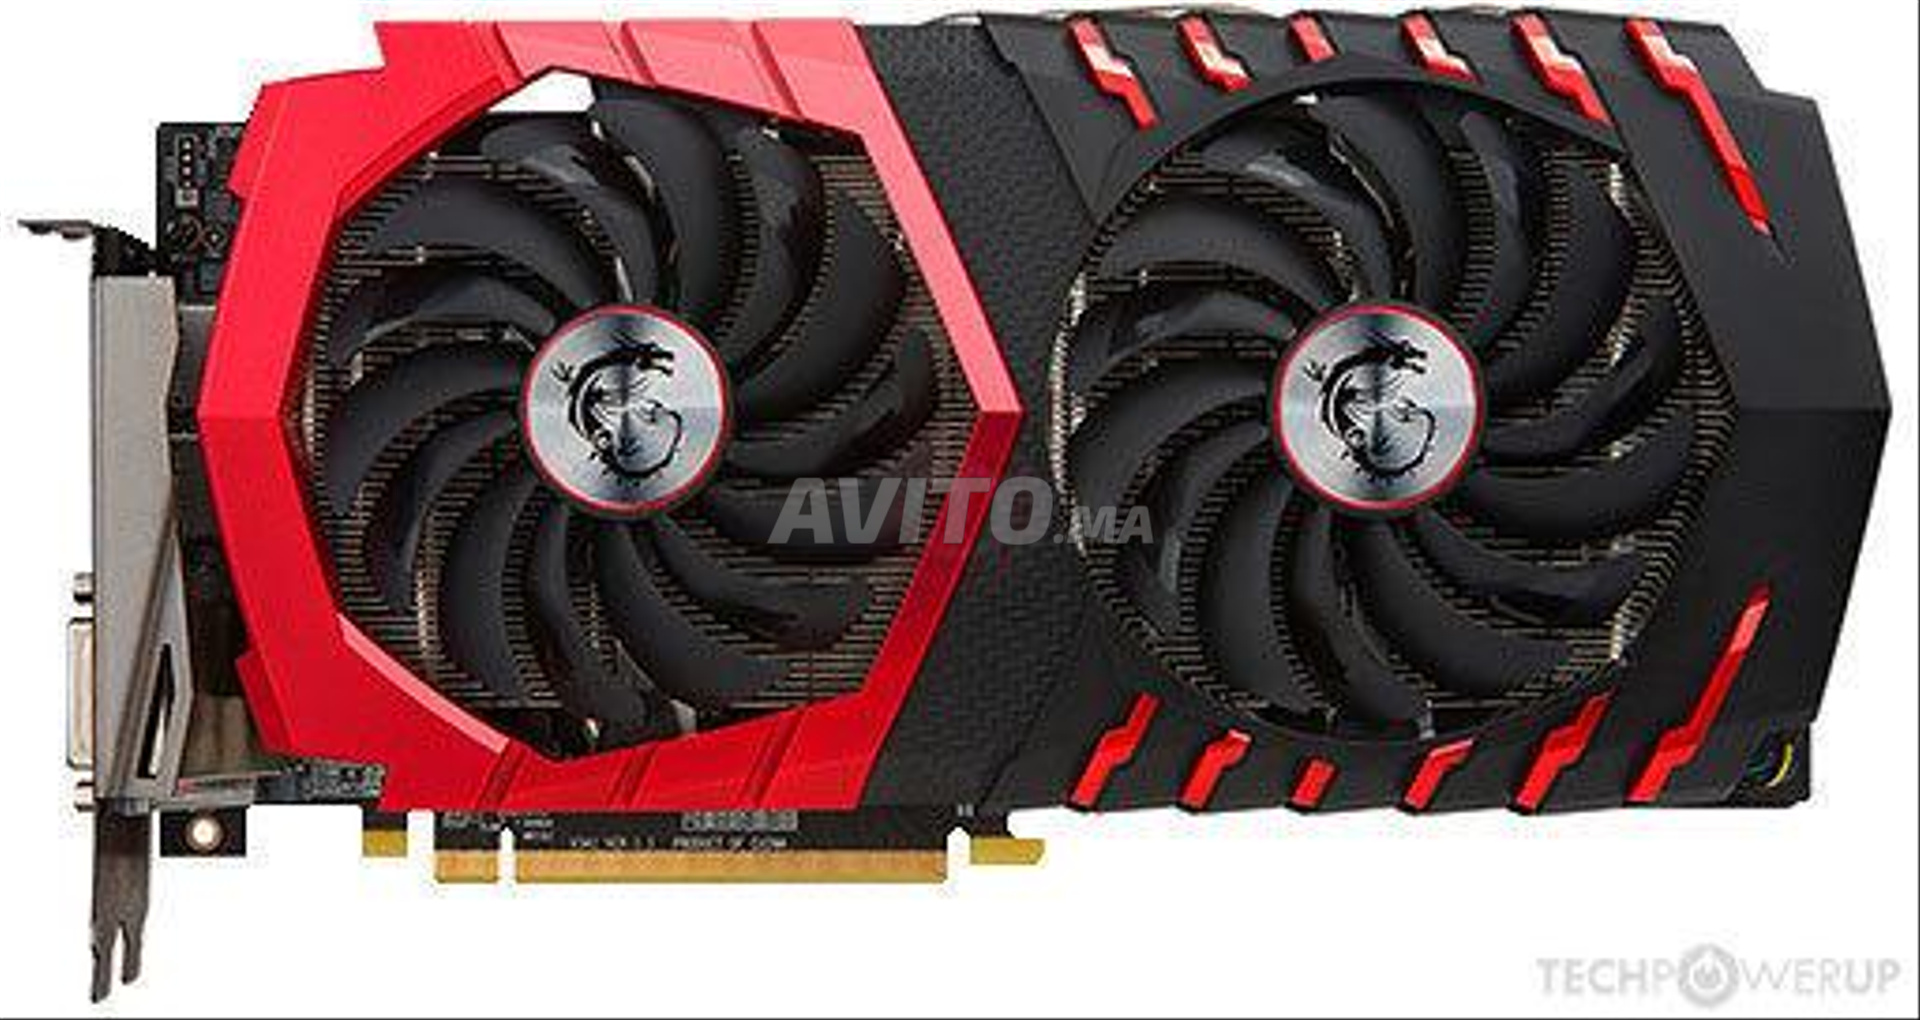 Cart graphique amd rx 570 4gb msi gaming x  - 2